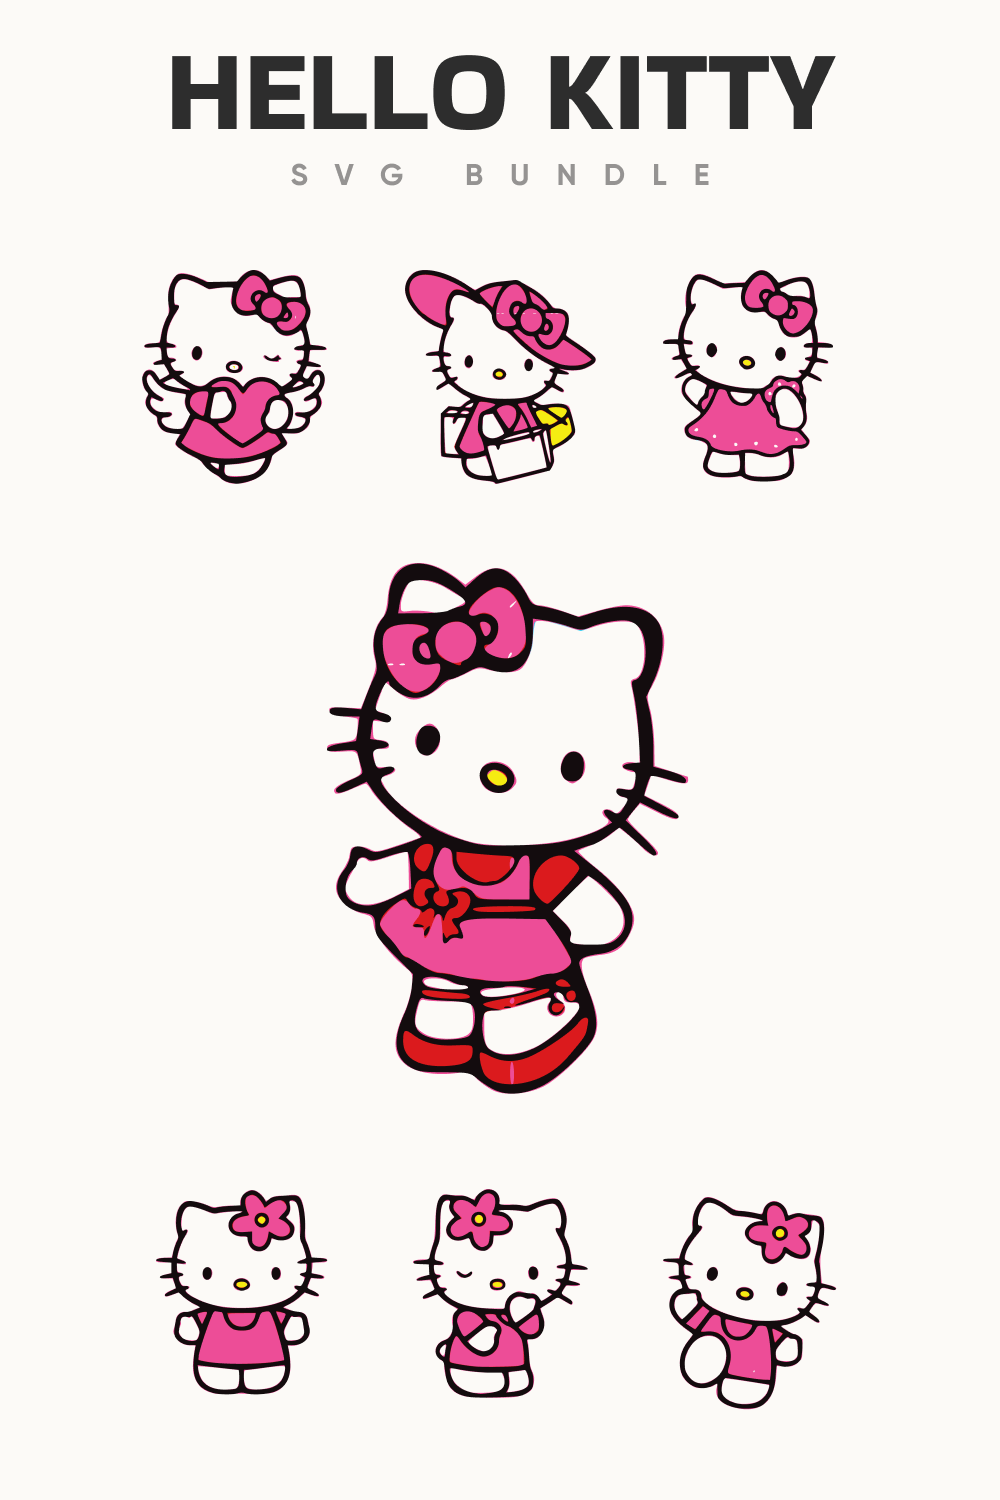 Image of a hello kitty wallpaper.